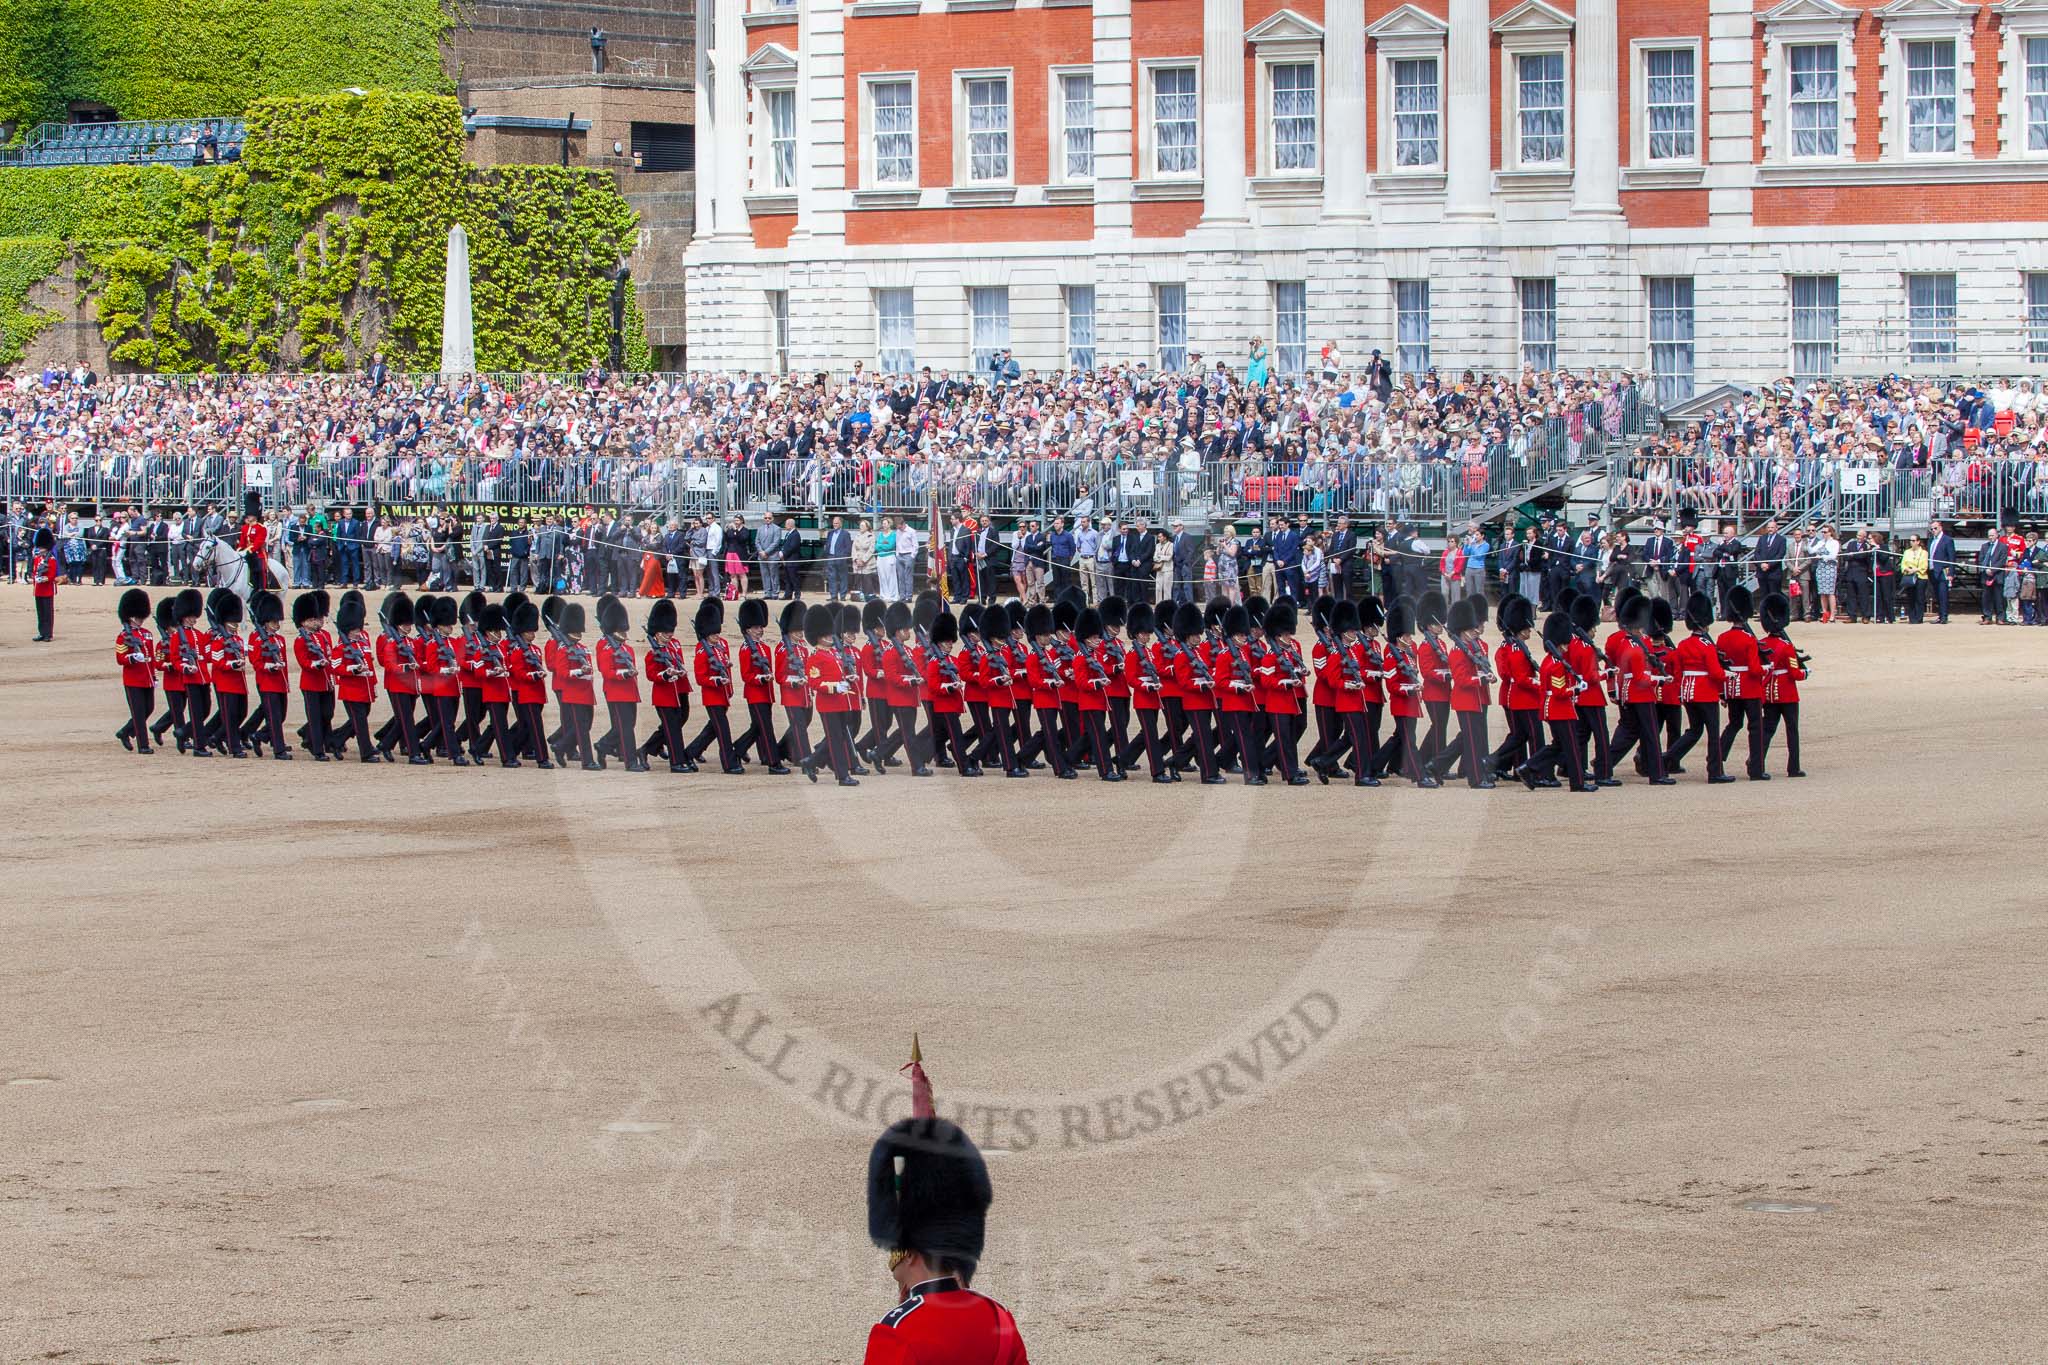 The Colonel's Review 2013: The Escort Tto the Colour performing a 90-degree-turn..
Horse Guards Parade, Westminster,
London SW1,

United Kingdom,
on 08 June 2013 at 11:22, image #546